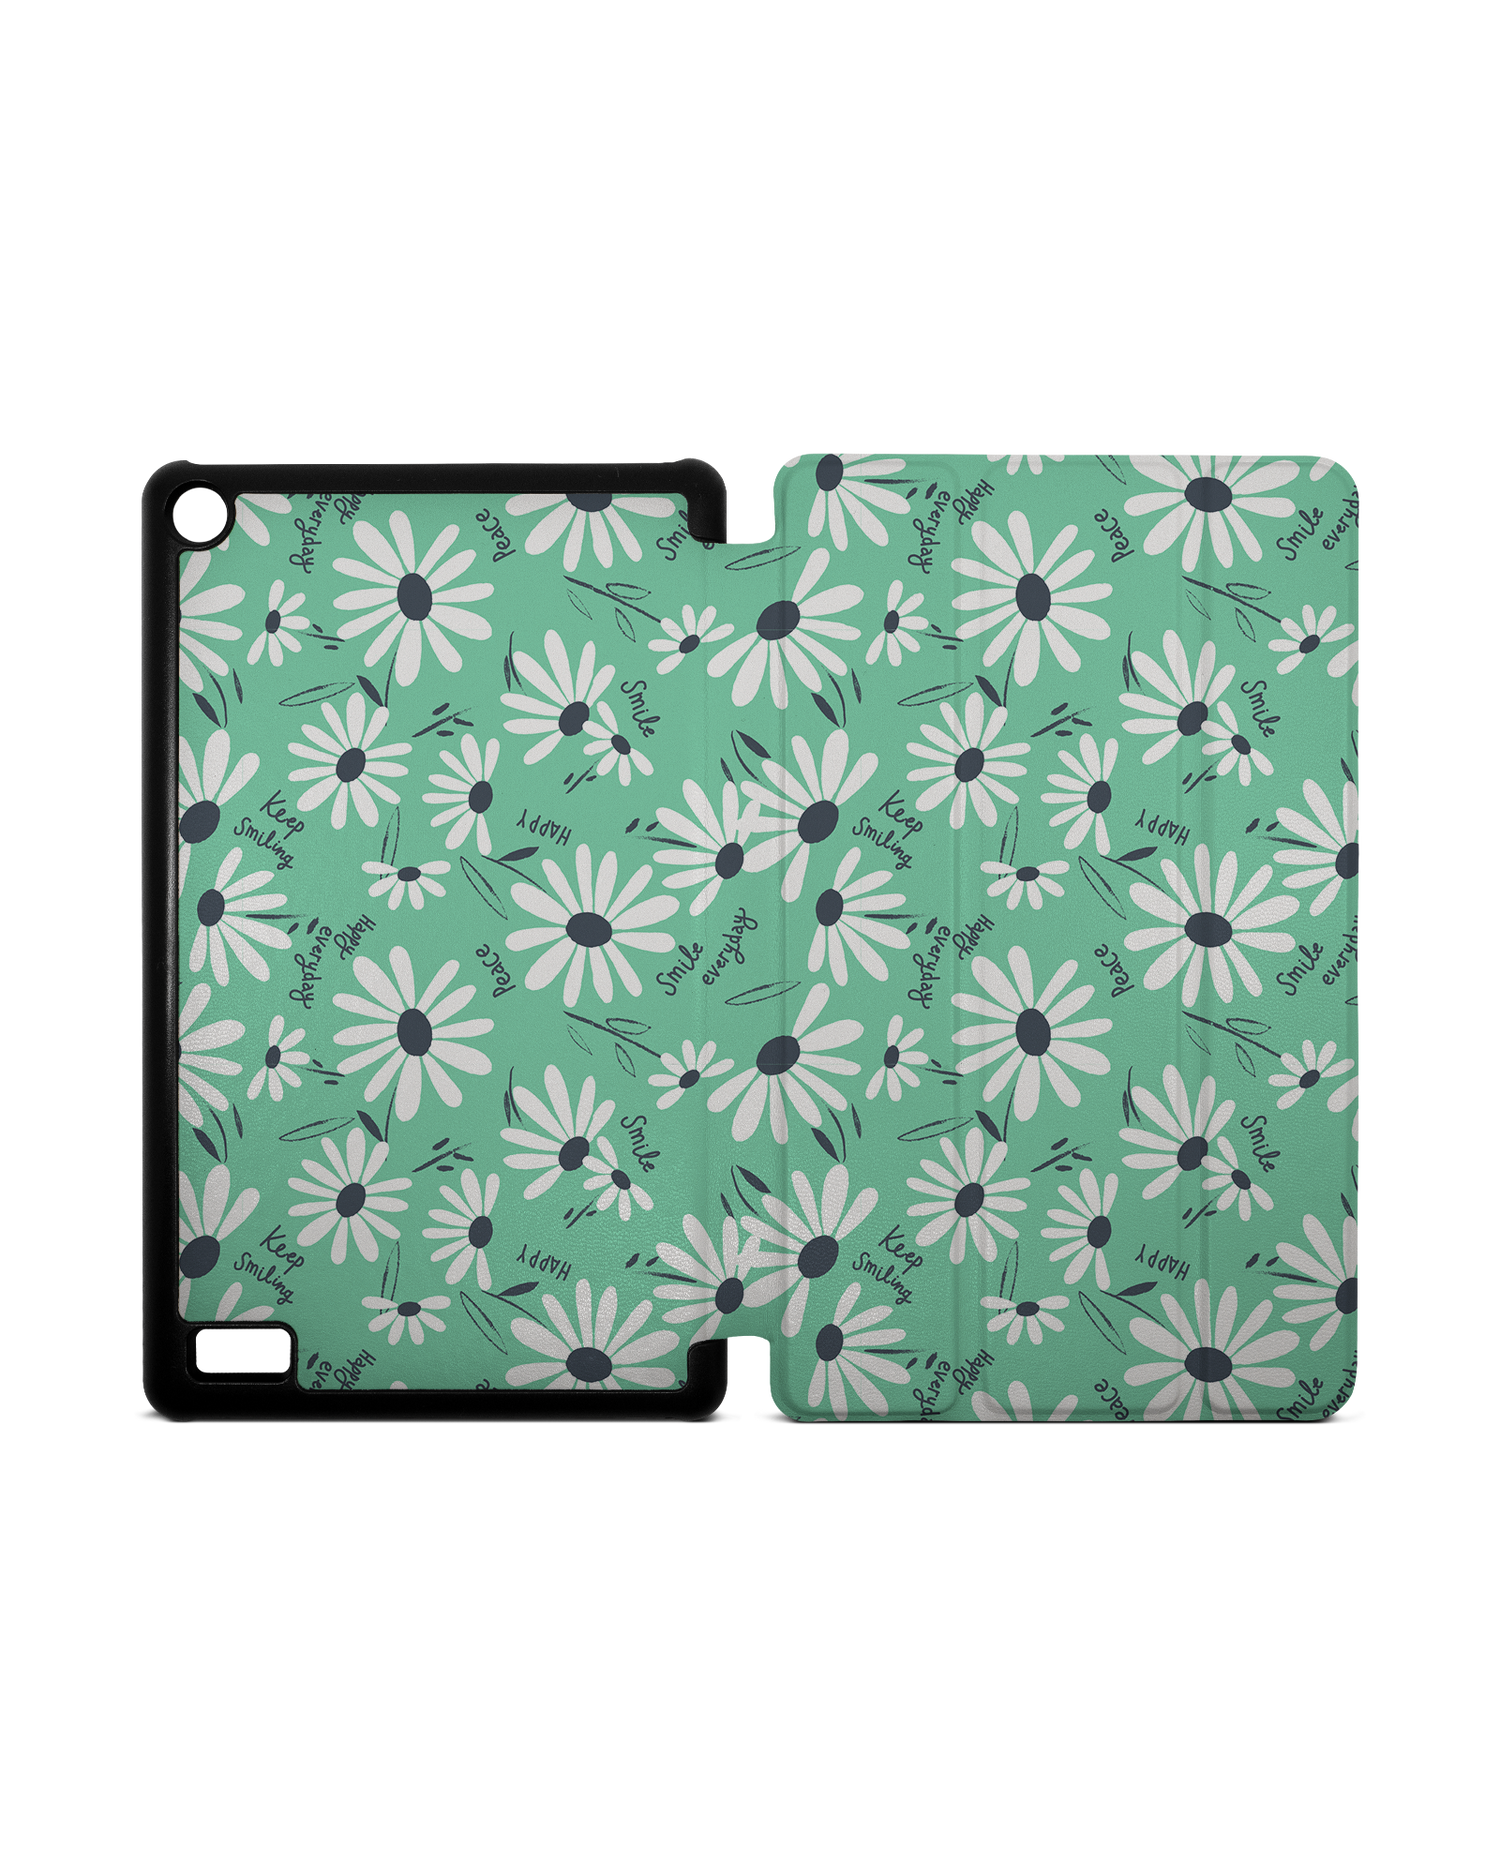 Positive Daisies Tablet Smart Case for Amazon Fire 7: Opened